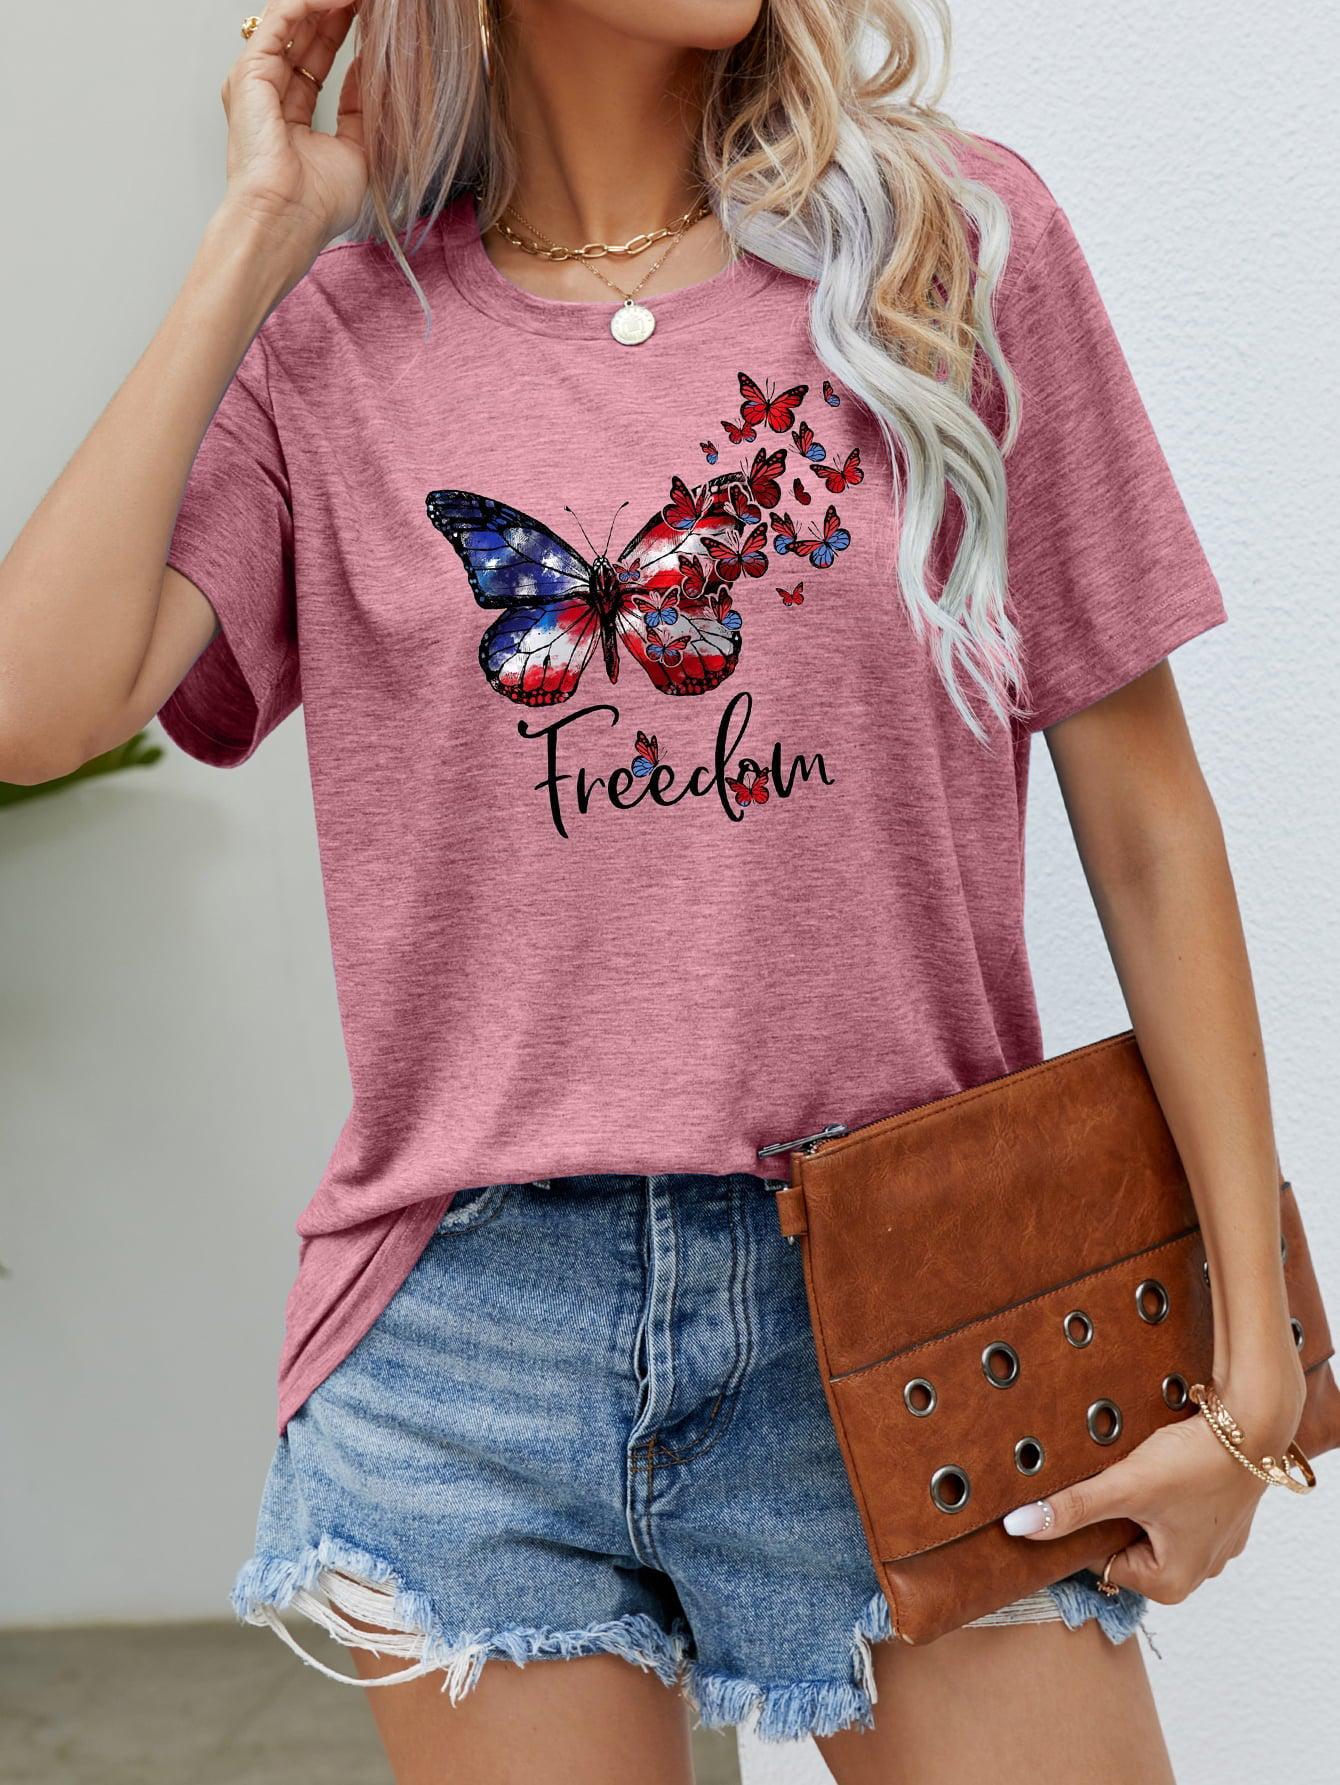 FREEDOM Butterfly Graphic Short Sleeve Tee BLUE ZONE PLANET